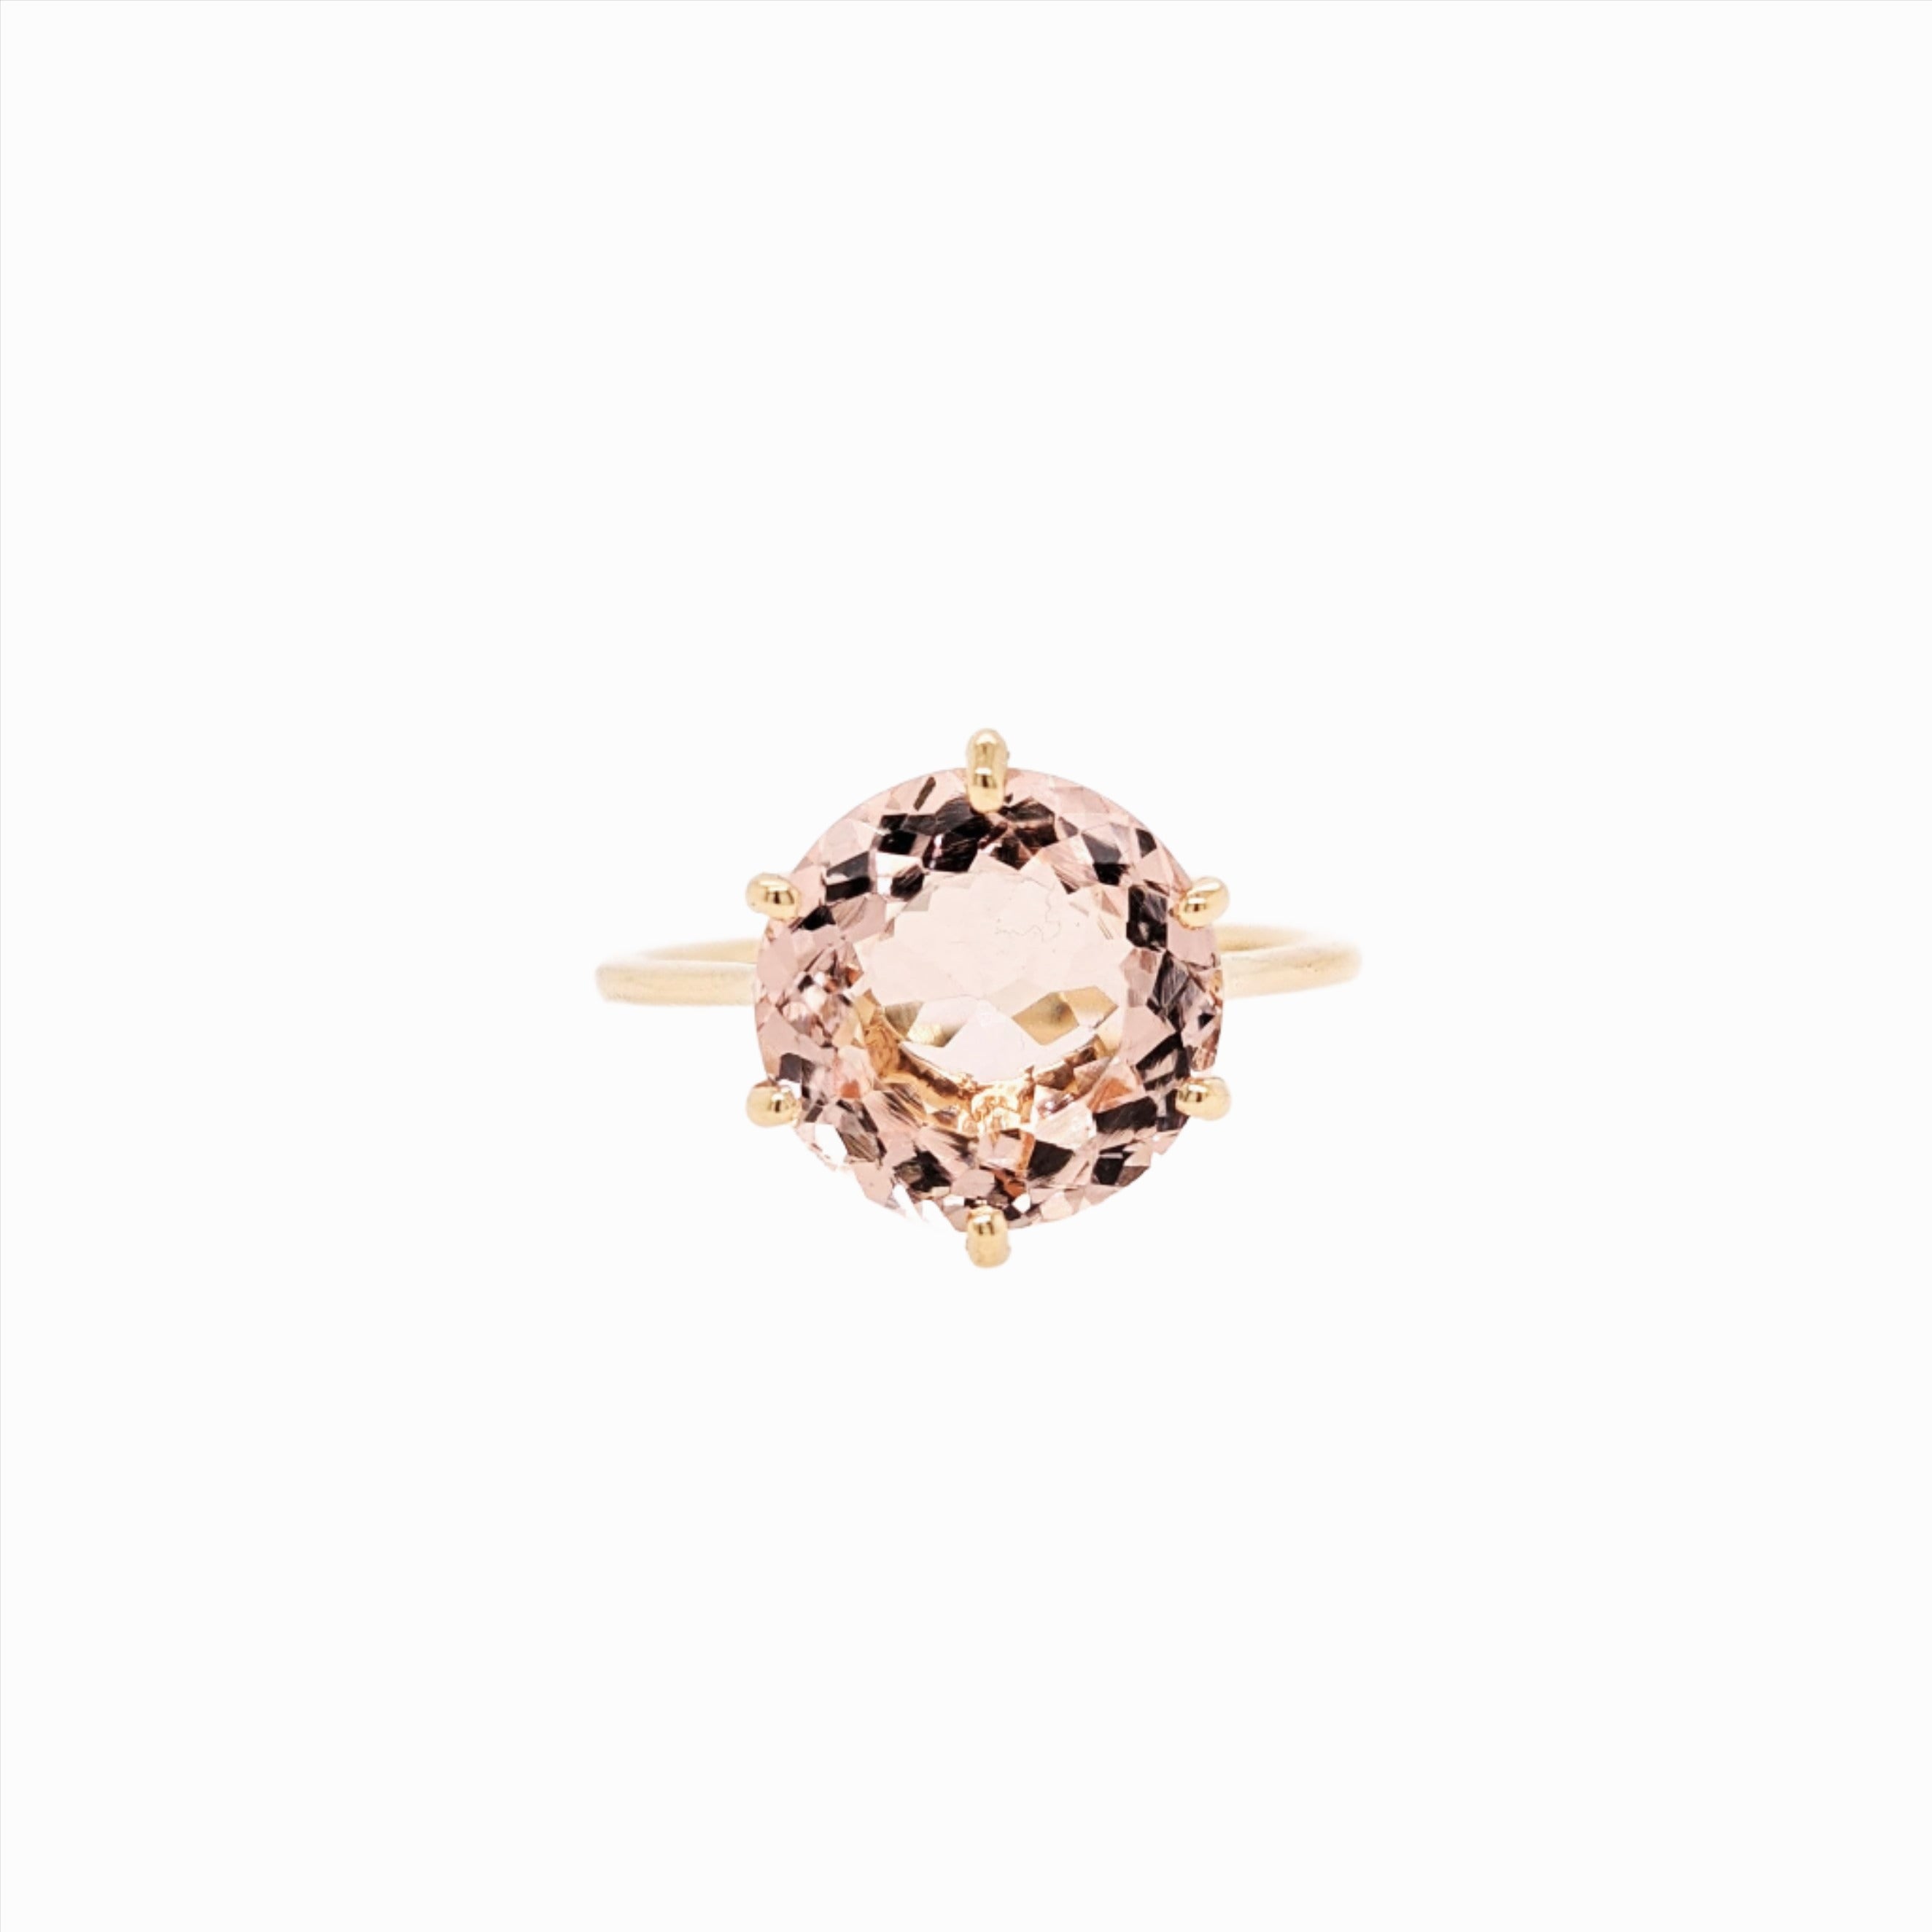 Peachy Pink Morganite Ring in Solid 14K Yellow Gold | Round Cut 11.5mm | Minimalist | Clean Design | 6 Prong Setting | Pink Gemstone